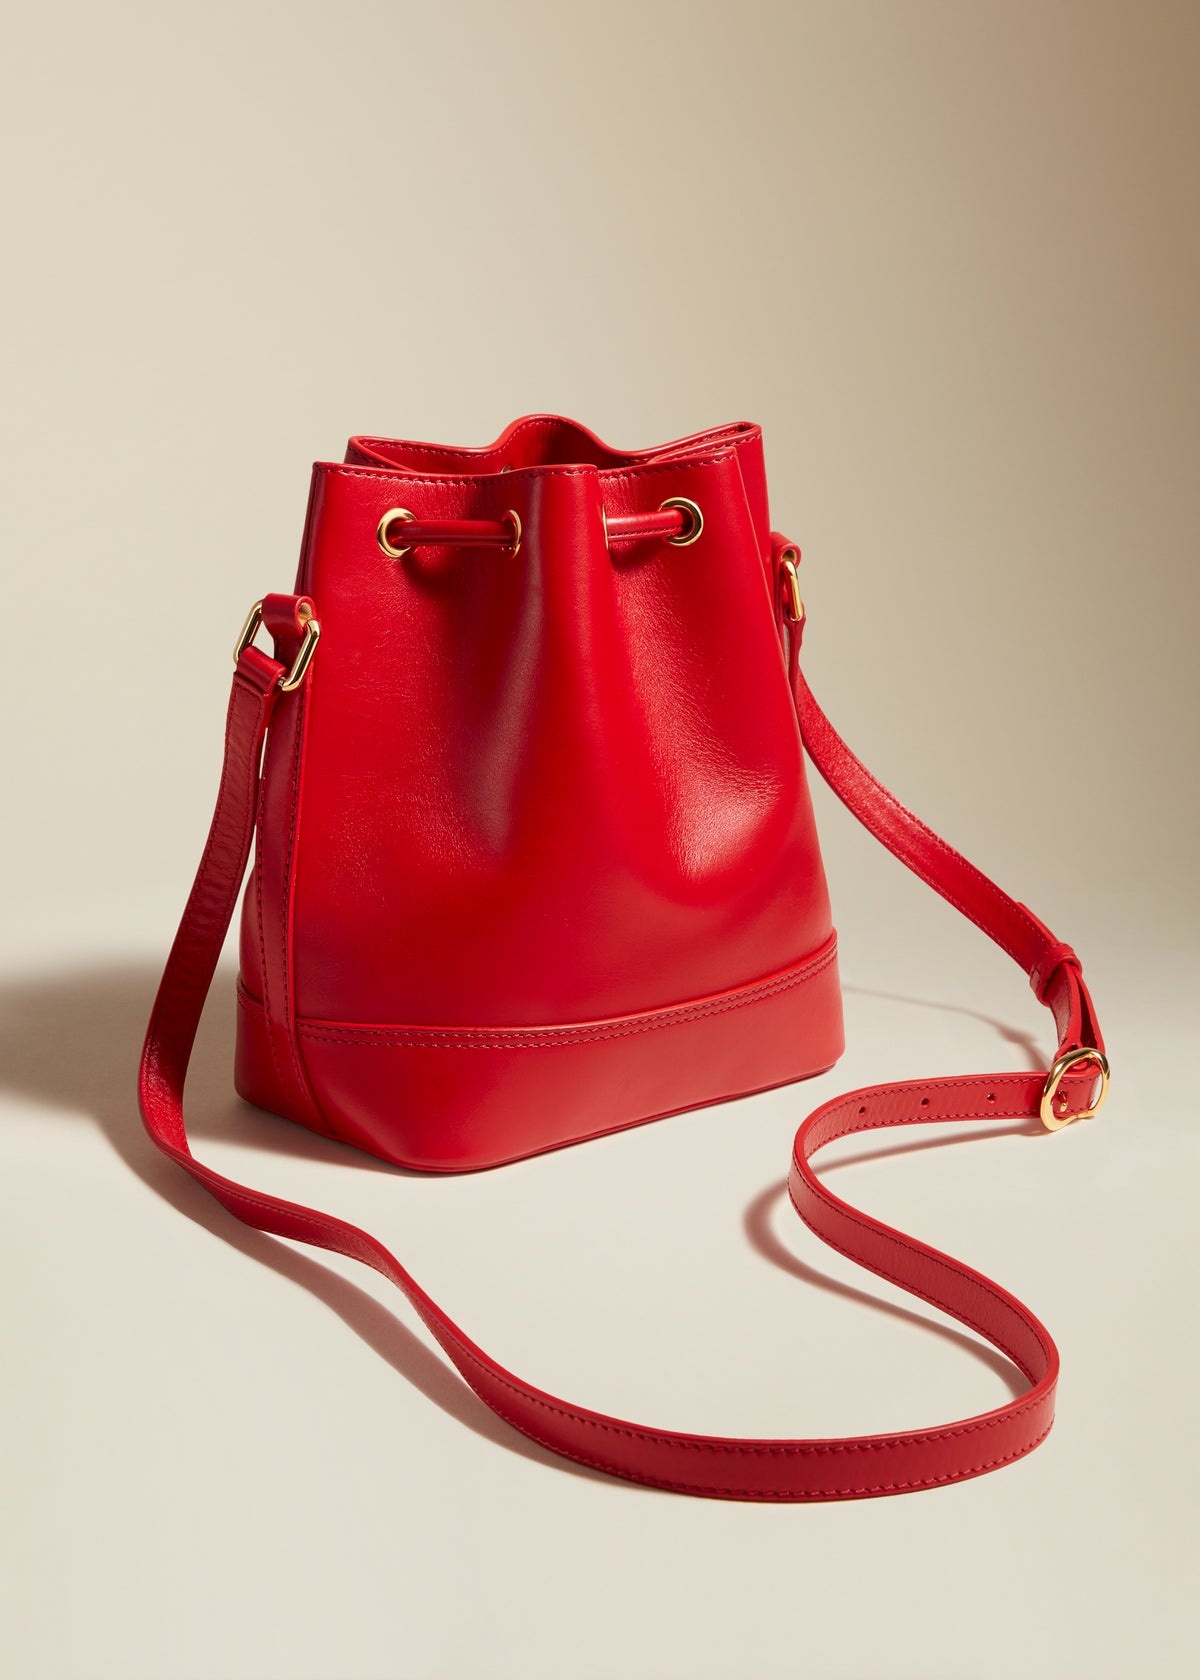 The Small Cecilia Crossbody Bag in Scarlet Leather - 3